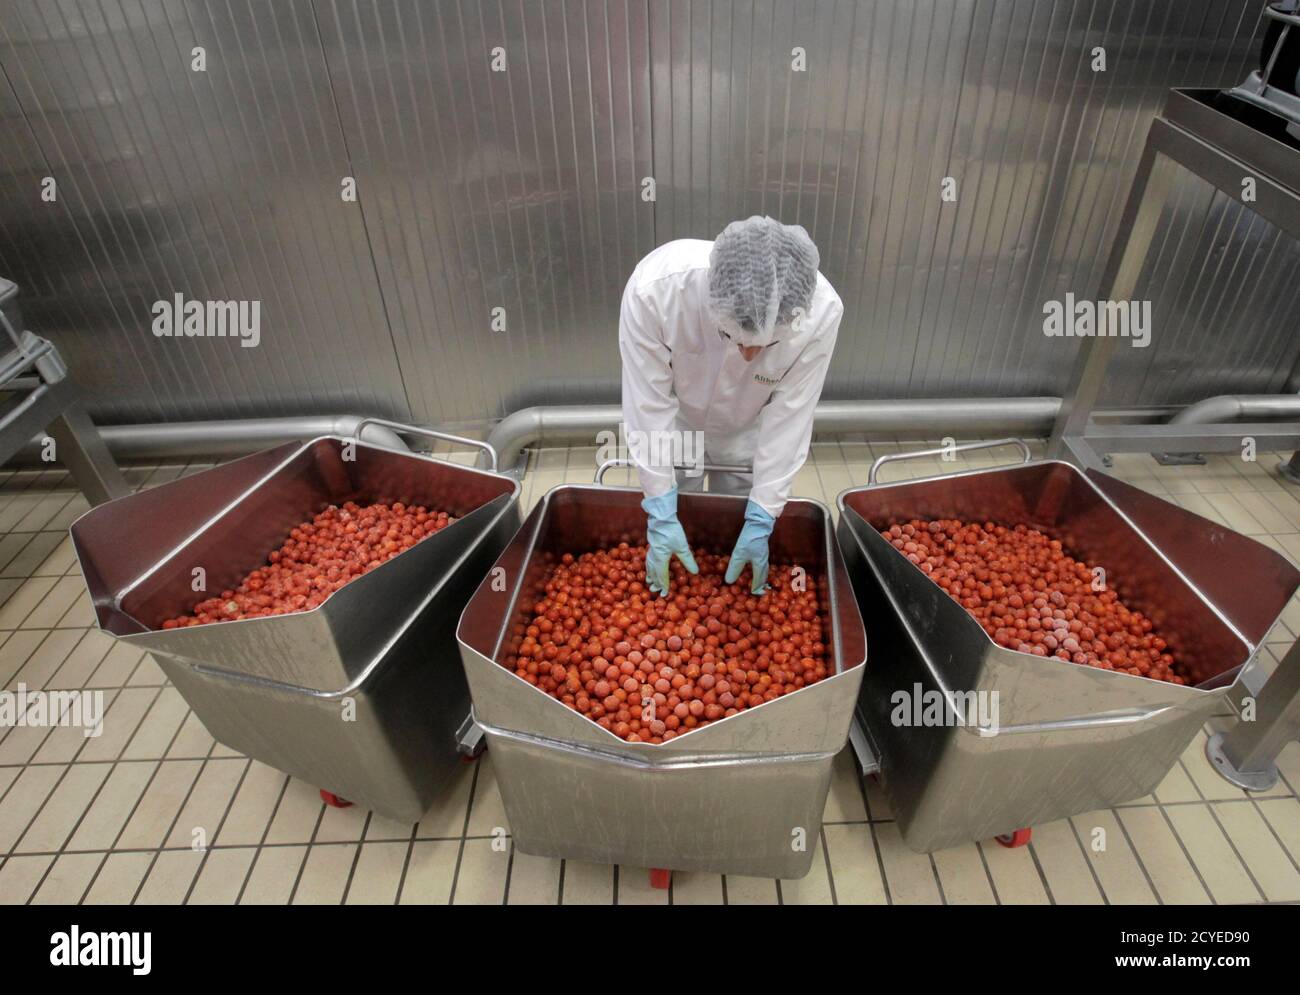 A worker inspects tomatoes in one of Paolo Ricciulli's factories in Parma  November 11, 2011. Ricciulli, awarded a "Knight of Labour" honour for his  business achievements, employs around 220 people at his